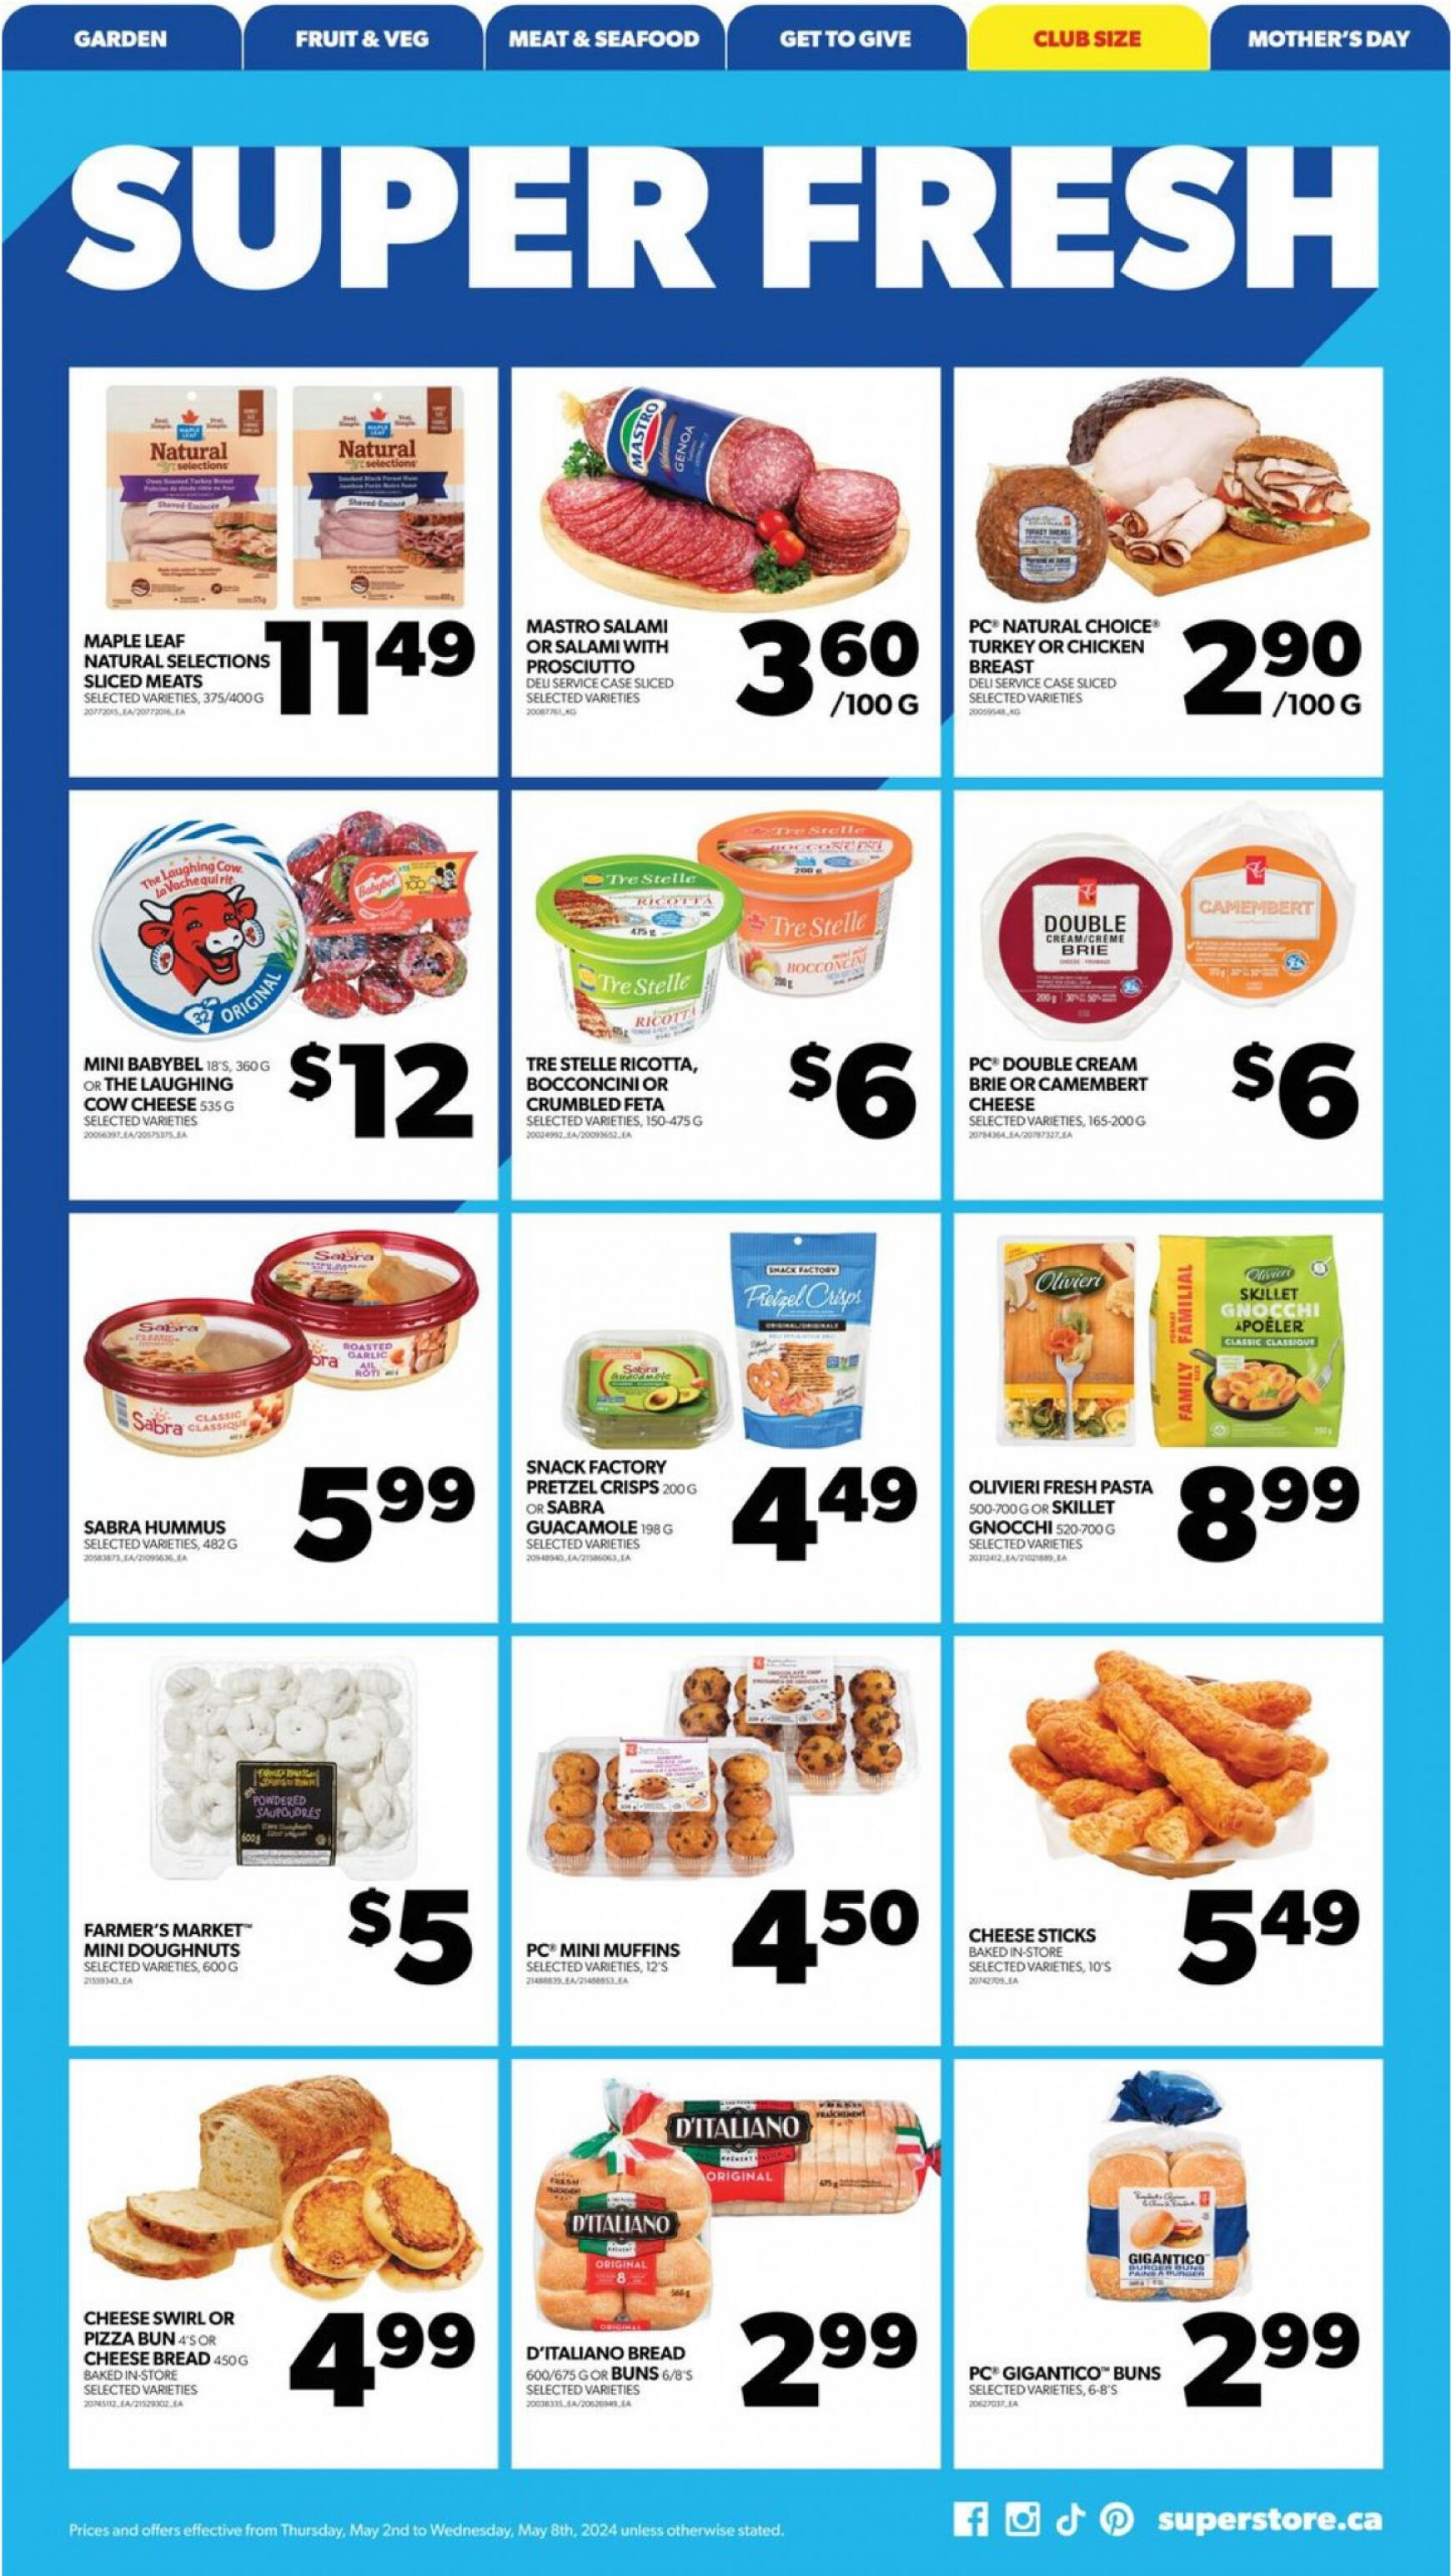 real-canadian-superstore - Real Canadian Superstore flyer current 02.05. - 08.05. - page: 10